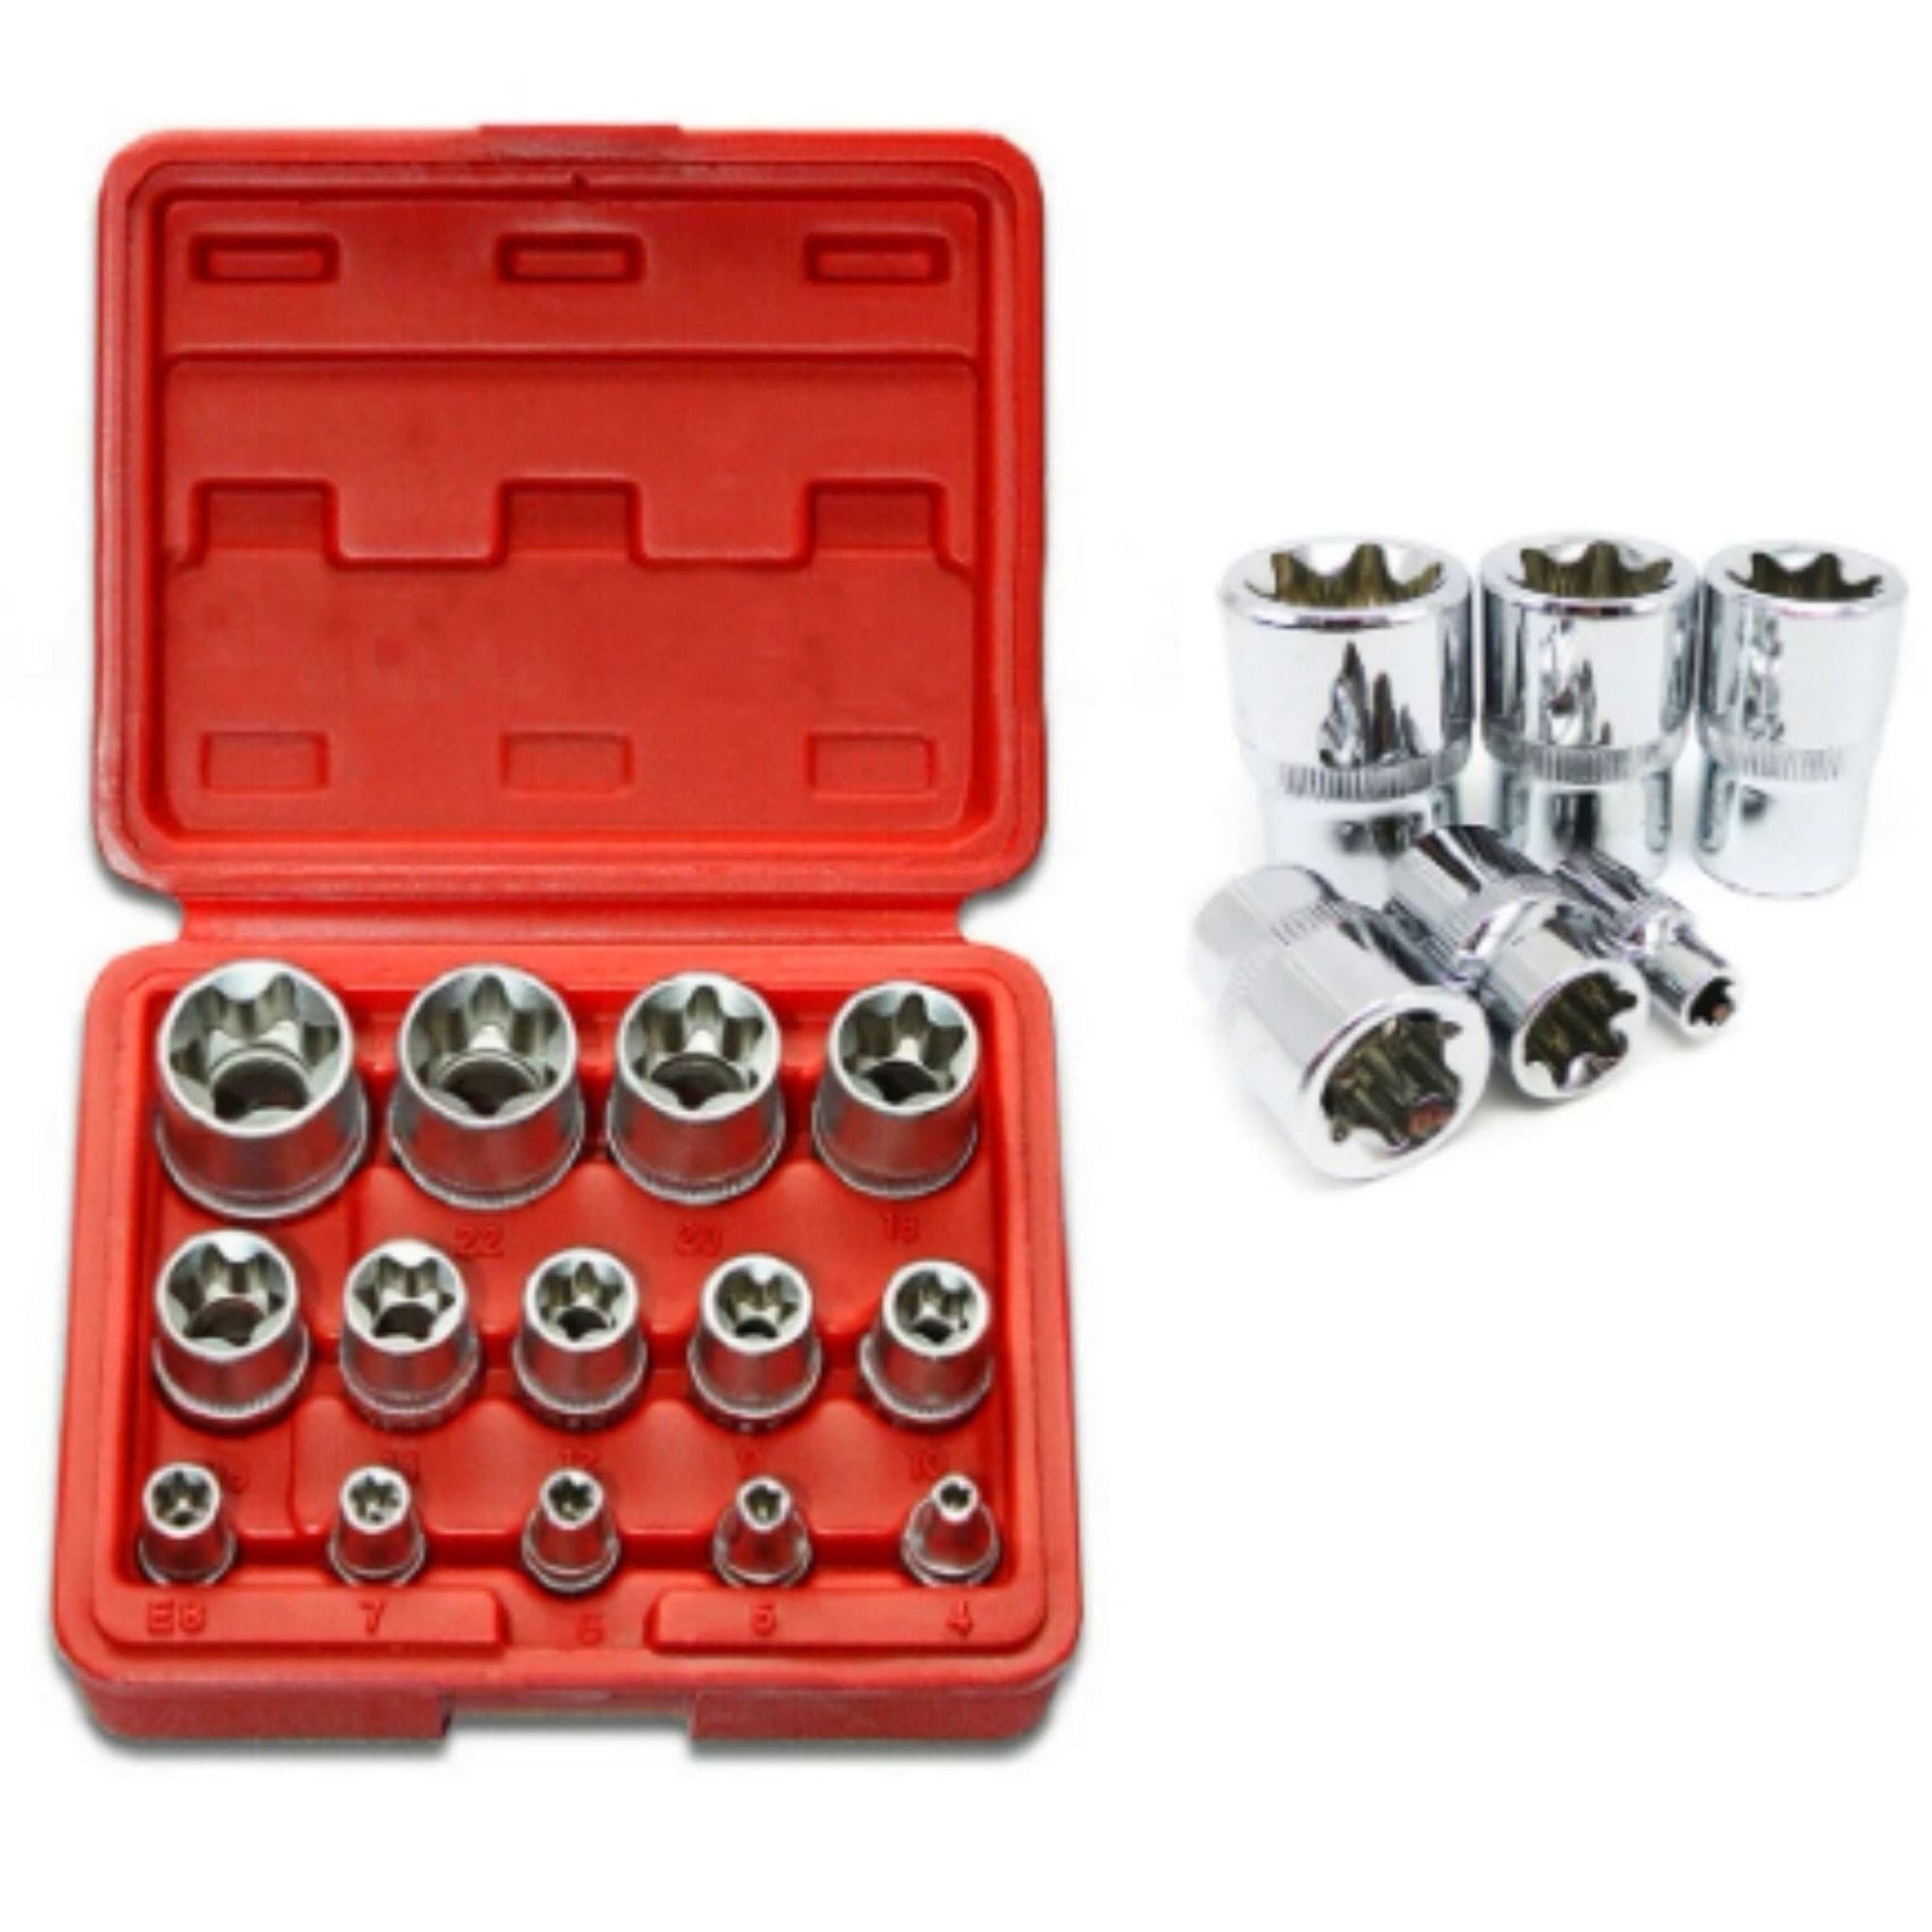 14-Pieces Female E-TORX Star Socket Set with Red Case, 1/4" 3/8" 1/2" Drive, Female External Star Socket Set - (E4 - E24) - South East Clearance Centre